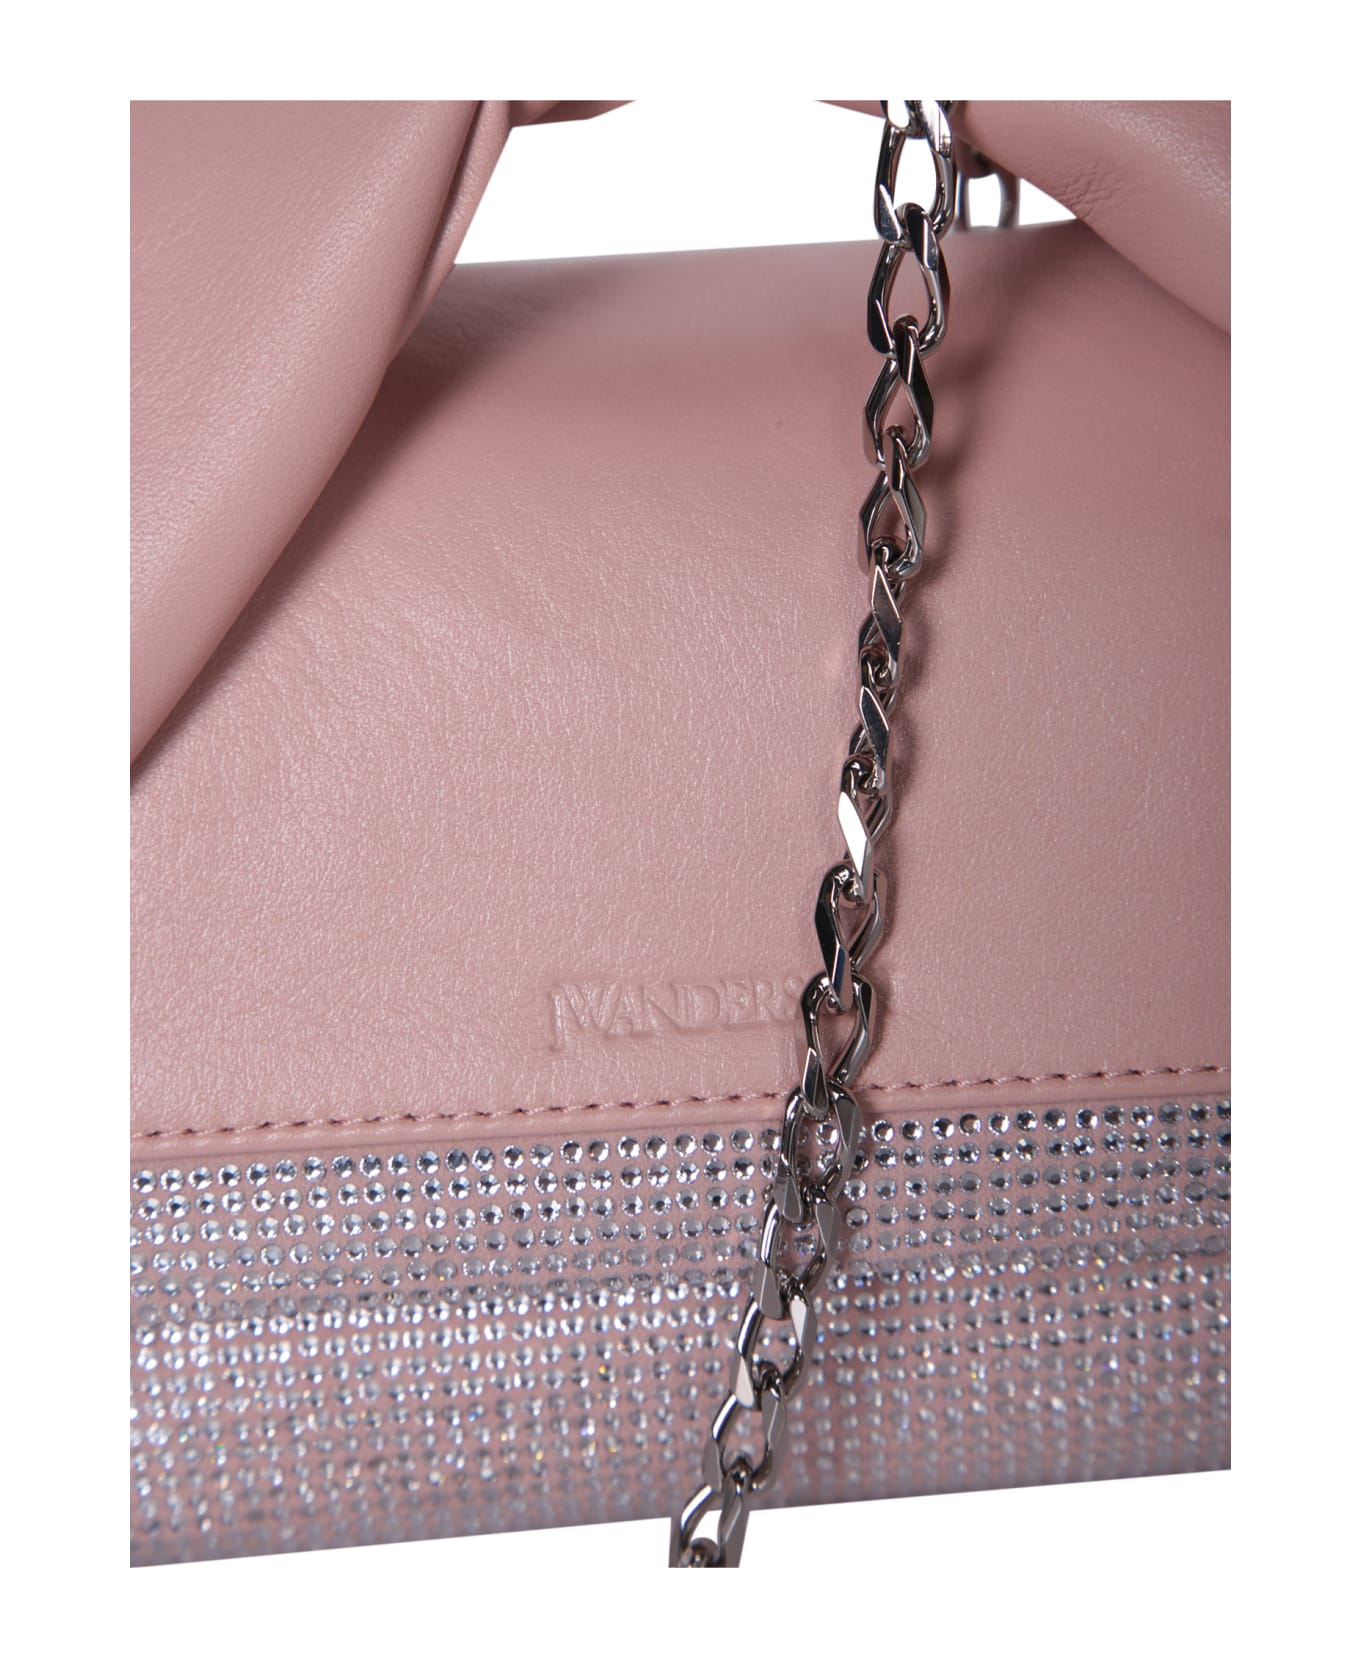 J.W. Anderson Twister Small Pink Bag - DUSTY ROSE